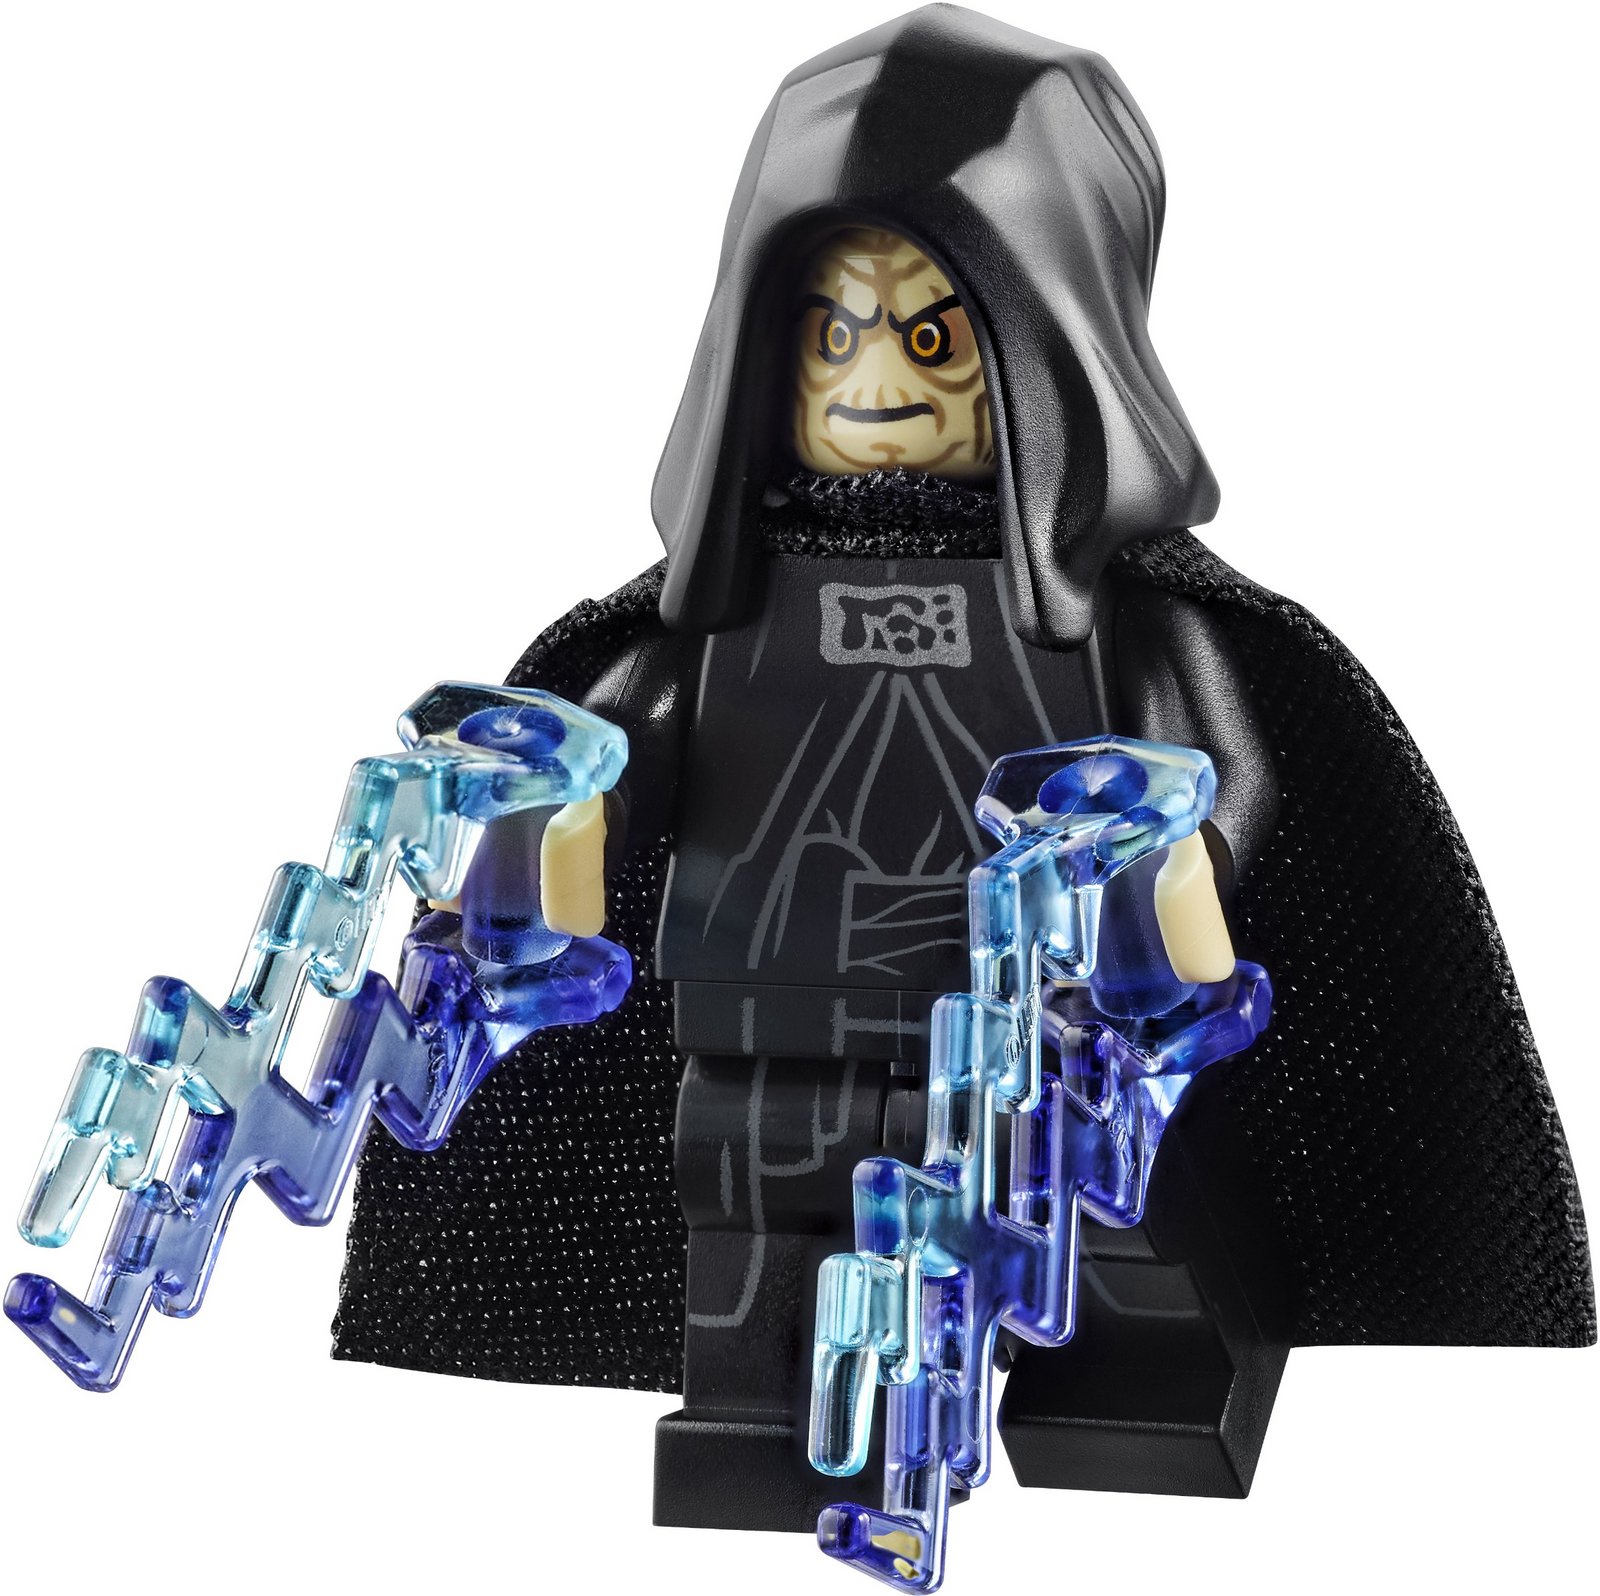 Lego Chancellor Palpatine 8039 Clone Wars Red Outfit Star Wars Minifigure 